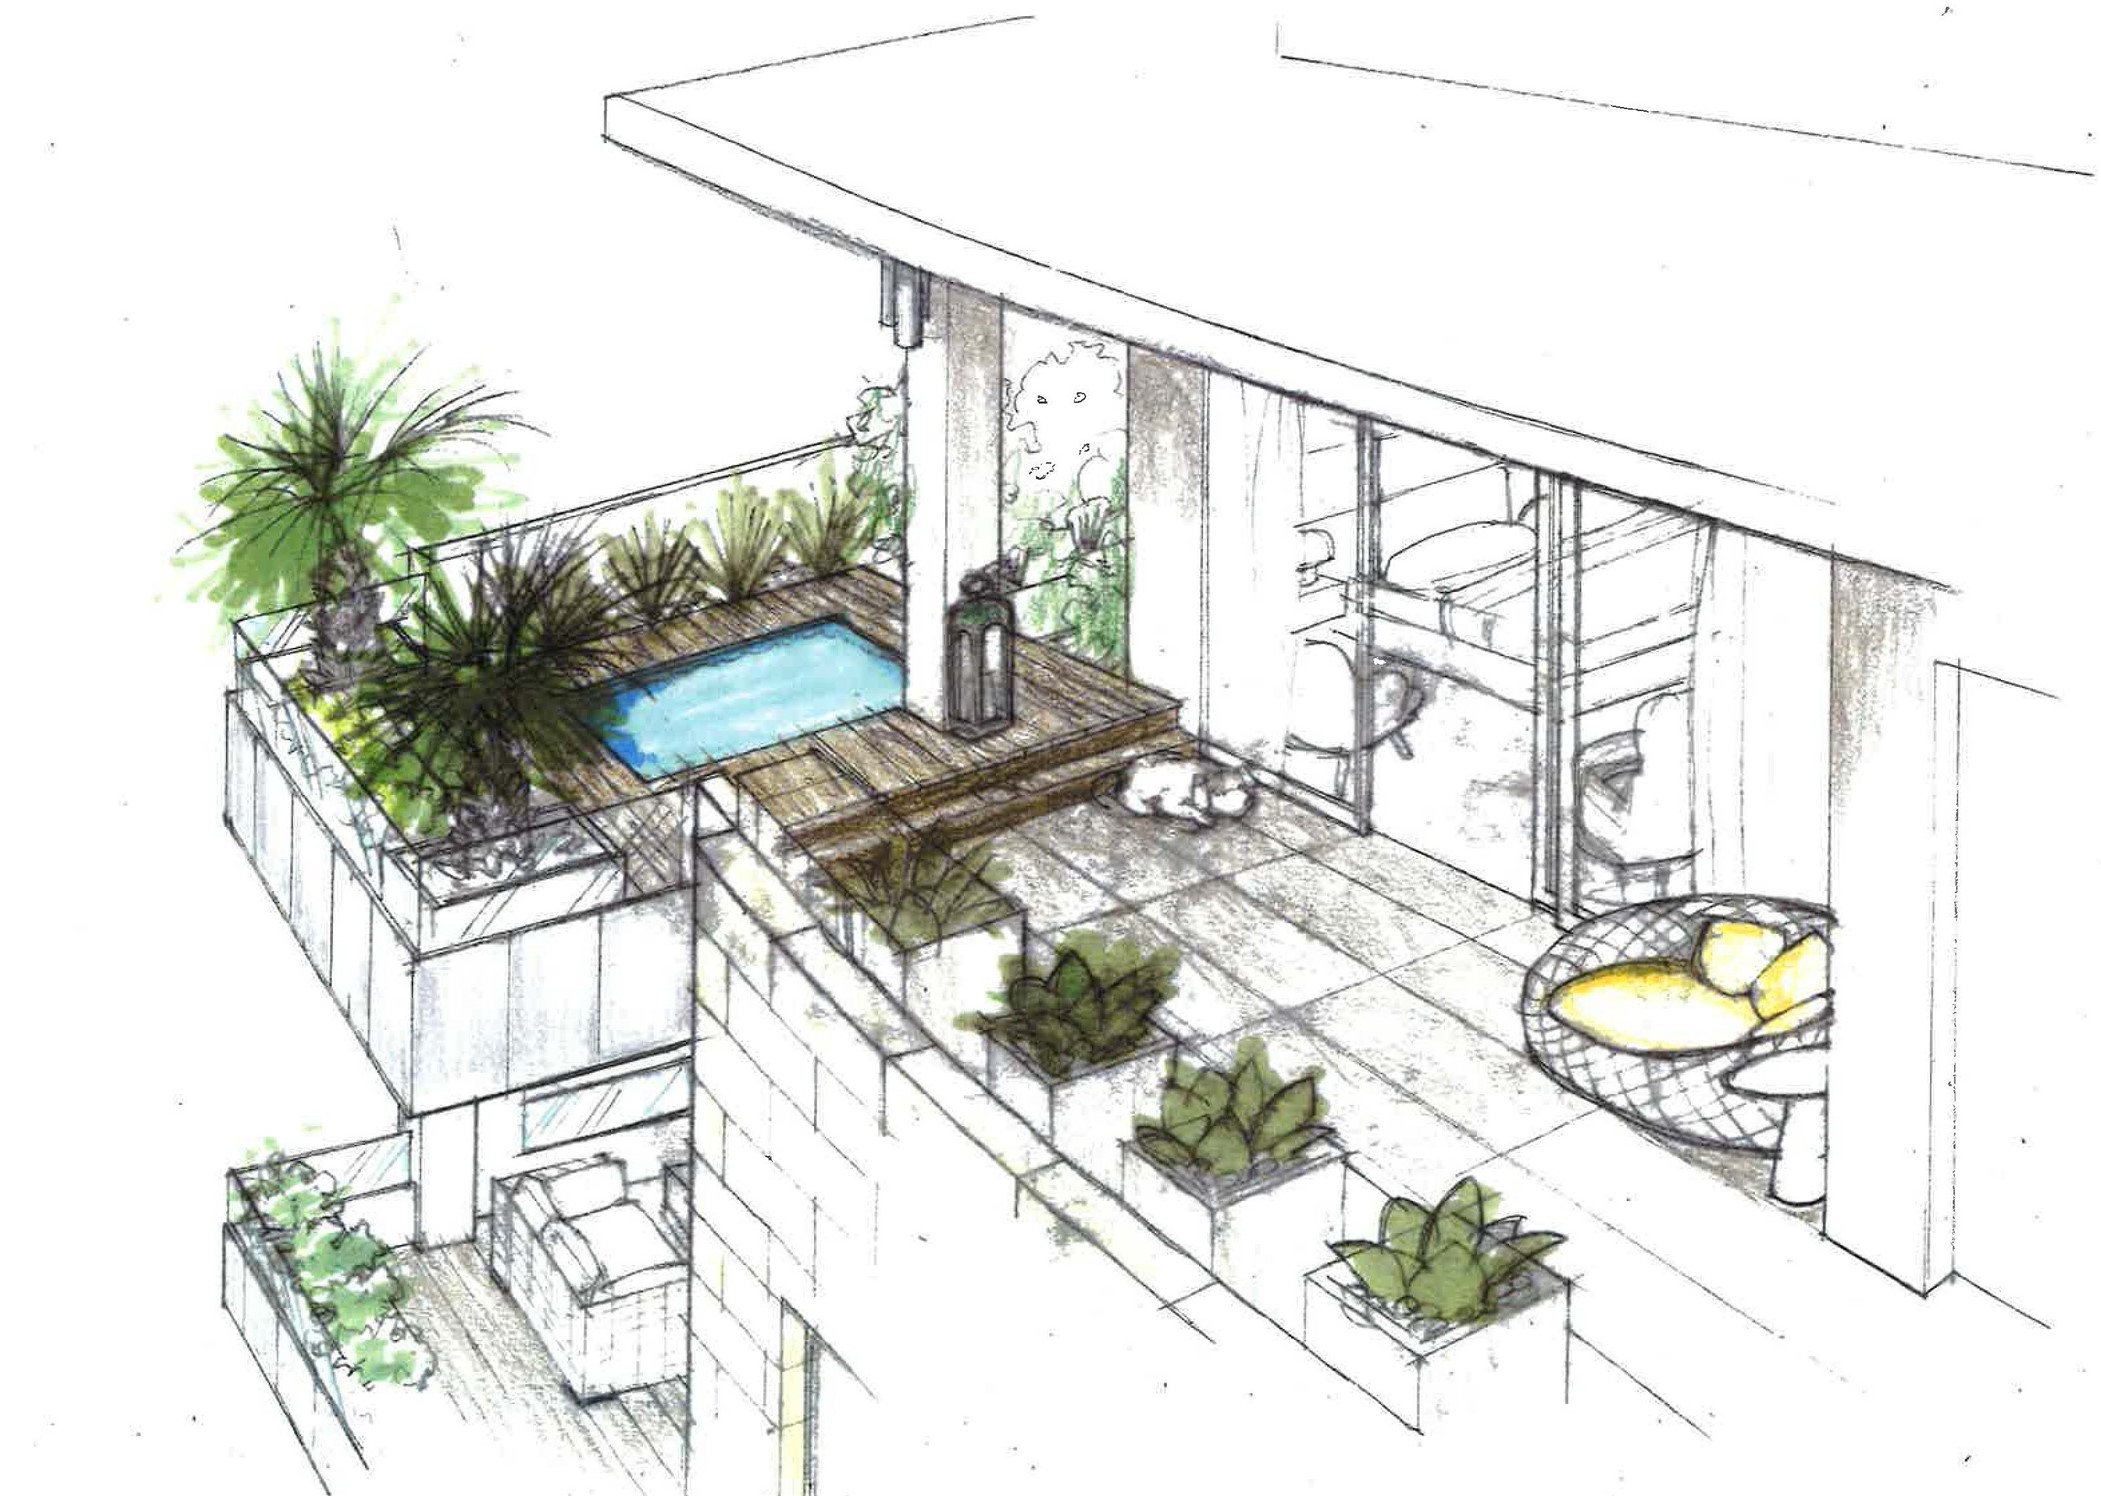 8th Floor PH Terrace optional Pool/Spa upgrade concept; achievable only with 8th Floor pre-construction contracts in order to properly structurally engineer. Image shown is conceptual; actual design customized with Buyer, if pool/spa desired.